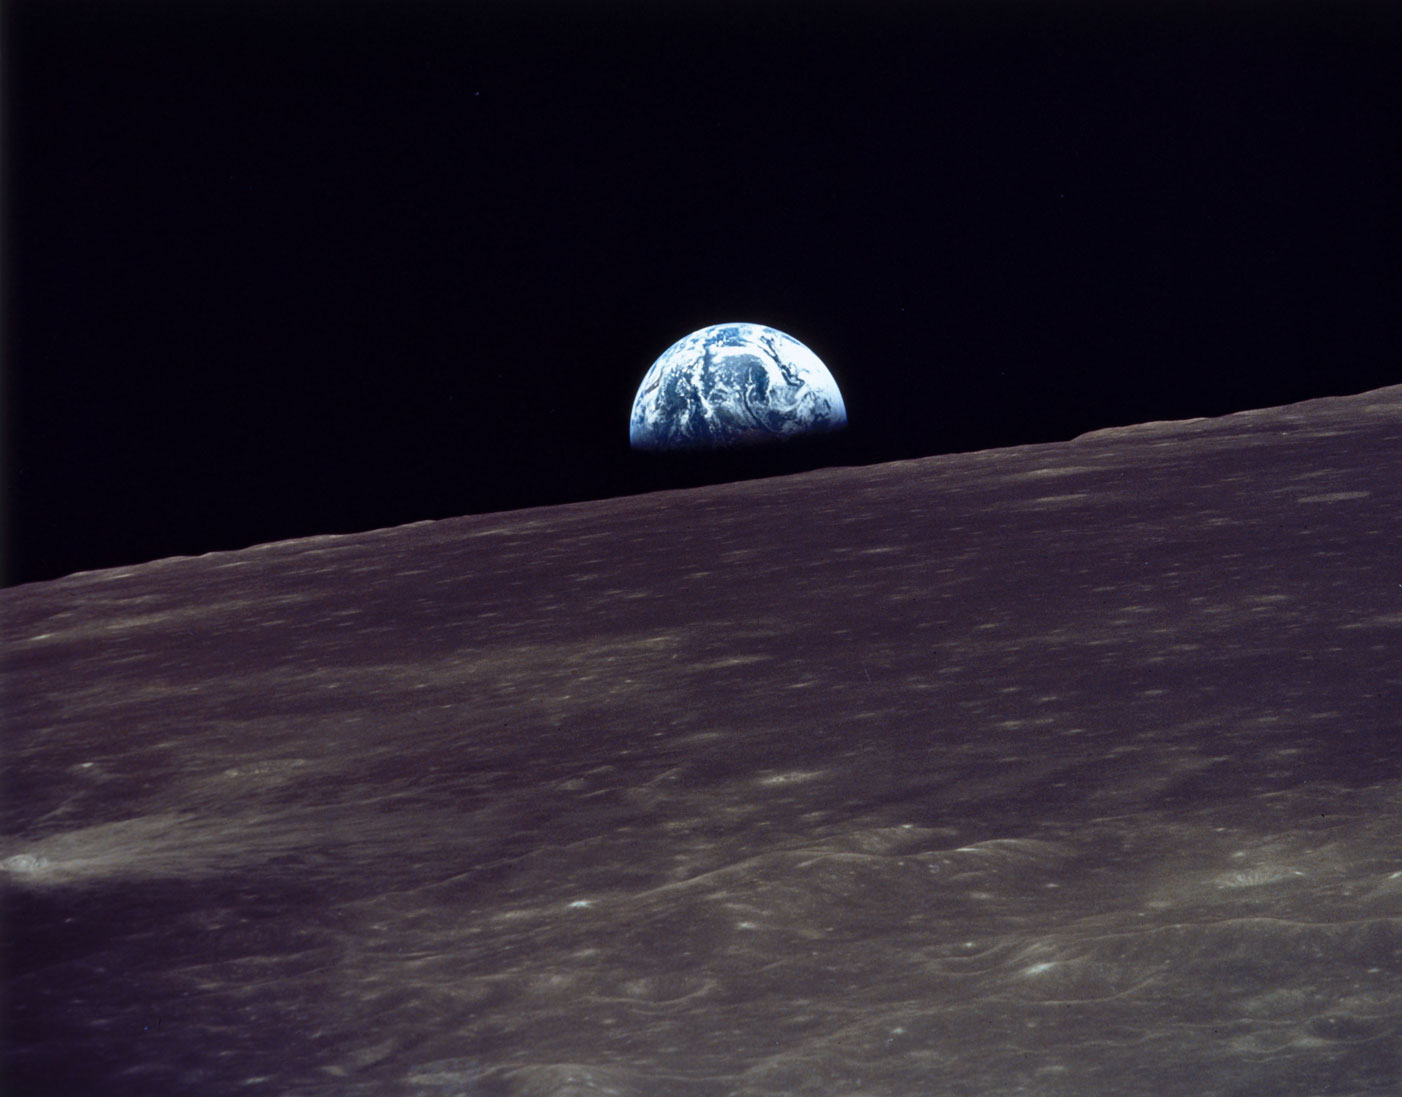 Earthrise, a photograph of the Earth taken by astronaut William Anders during the 1968 Apollo 8 mission.